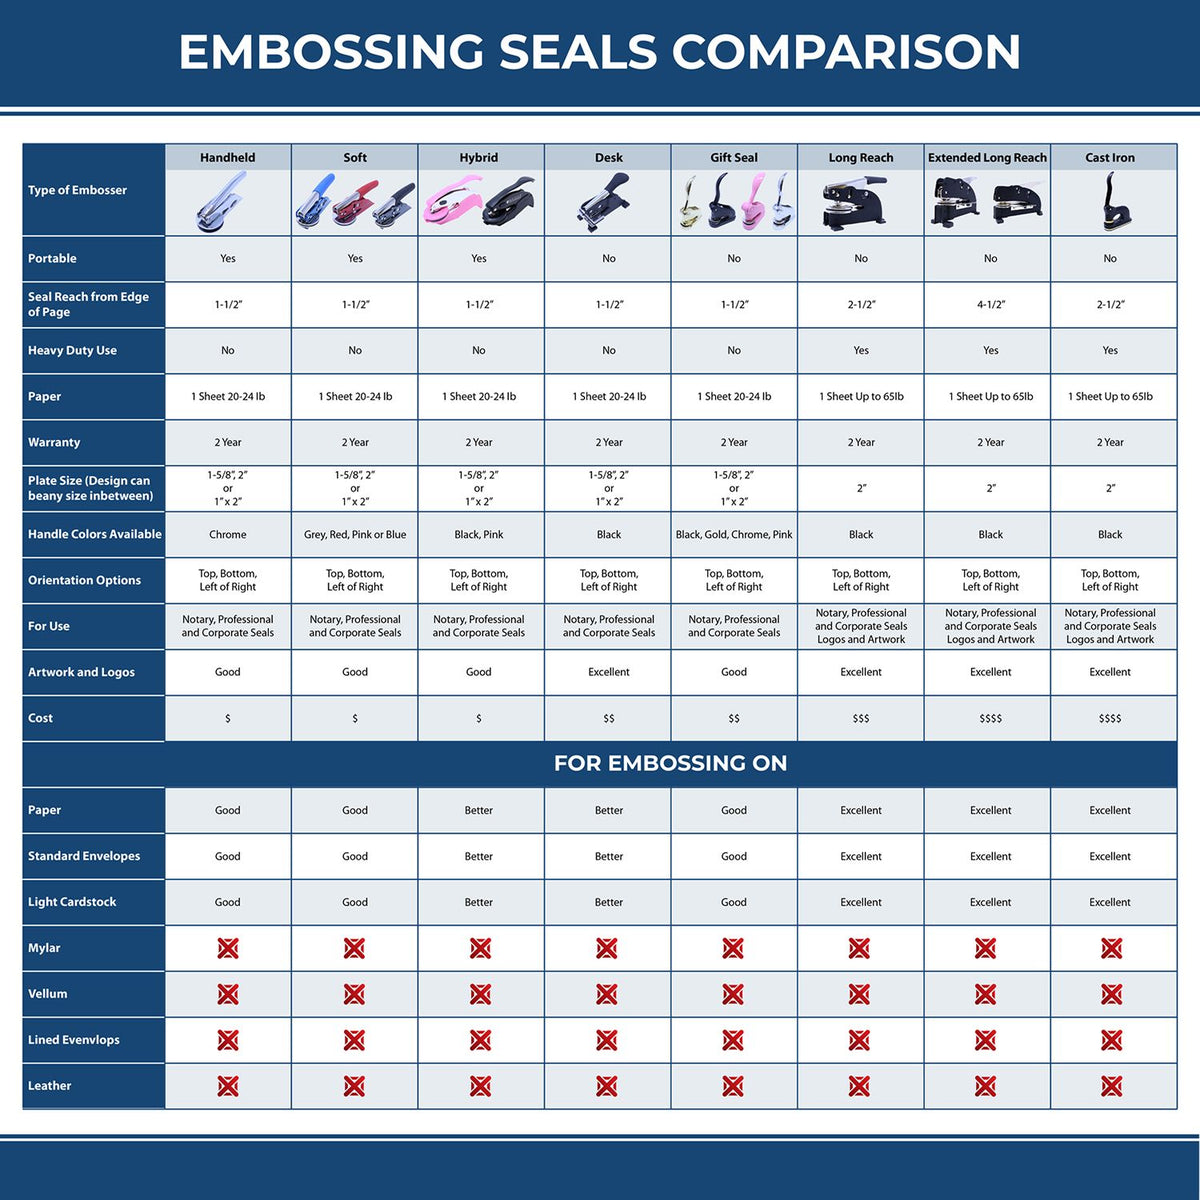 A comparison chart for the different types of mount models available for the Handheld Kentucky Professional Geologist Embosser